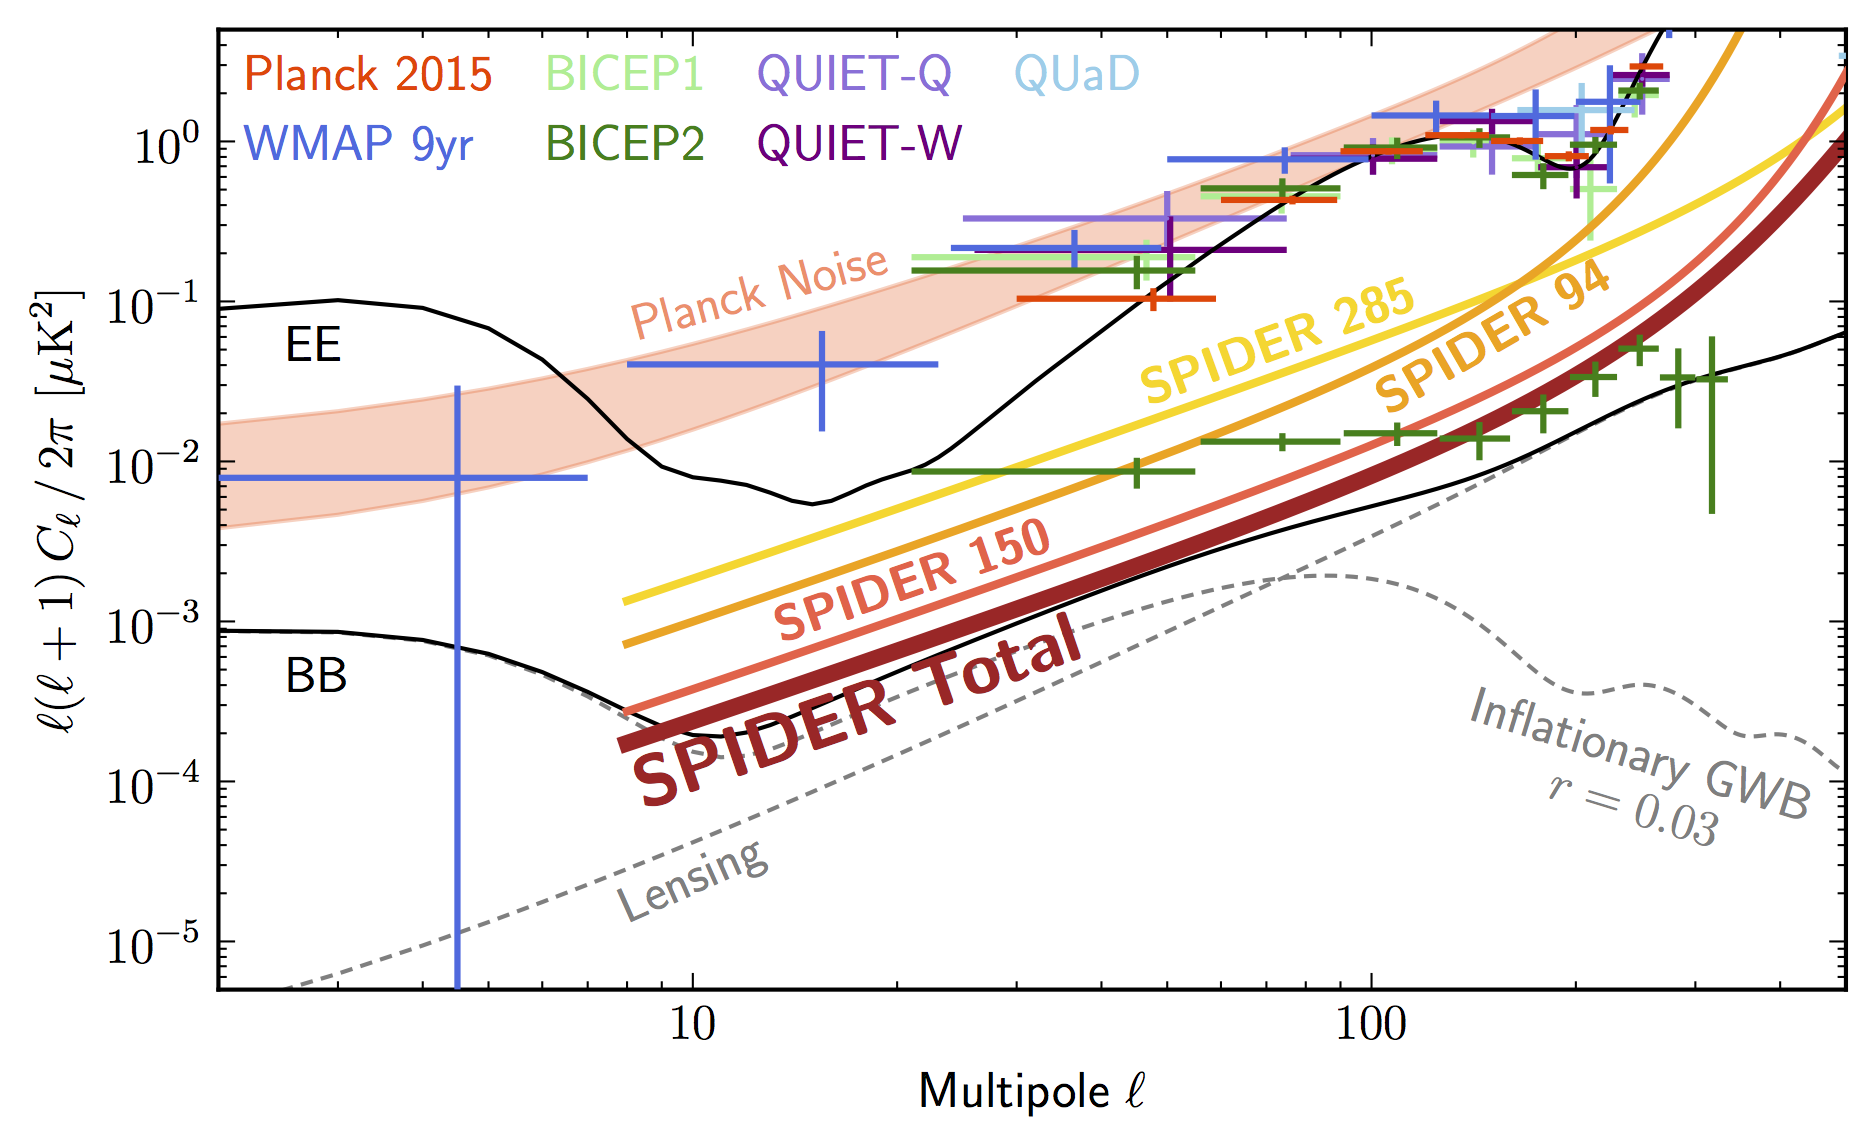 E- and B-mode power spectra and projected sensitivity for Spider after two flights